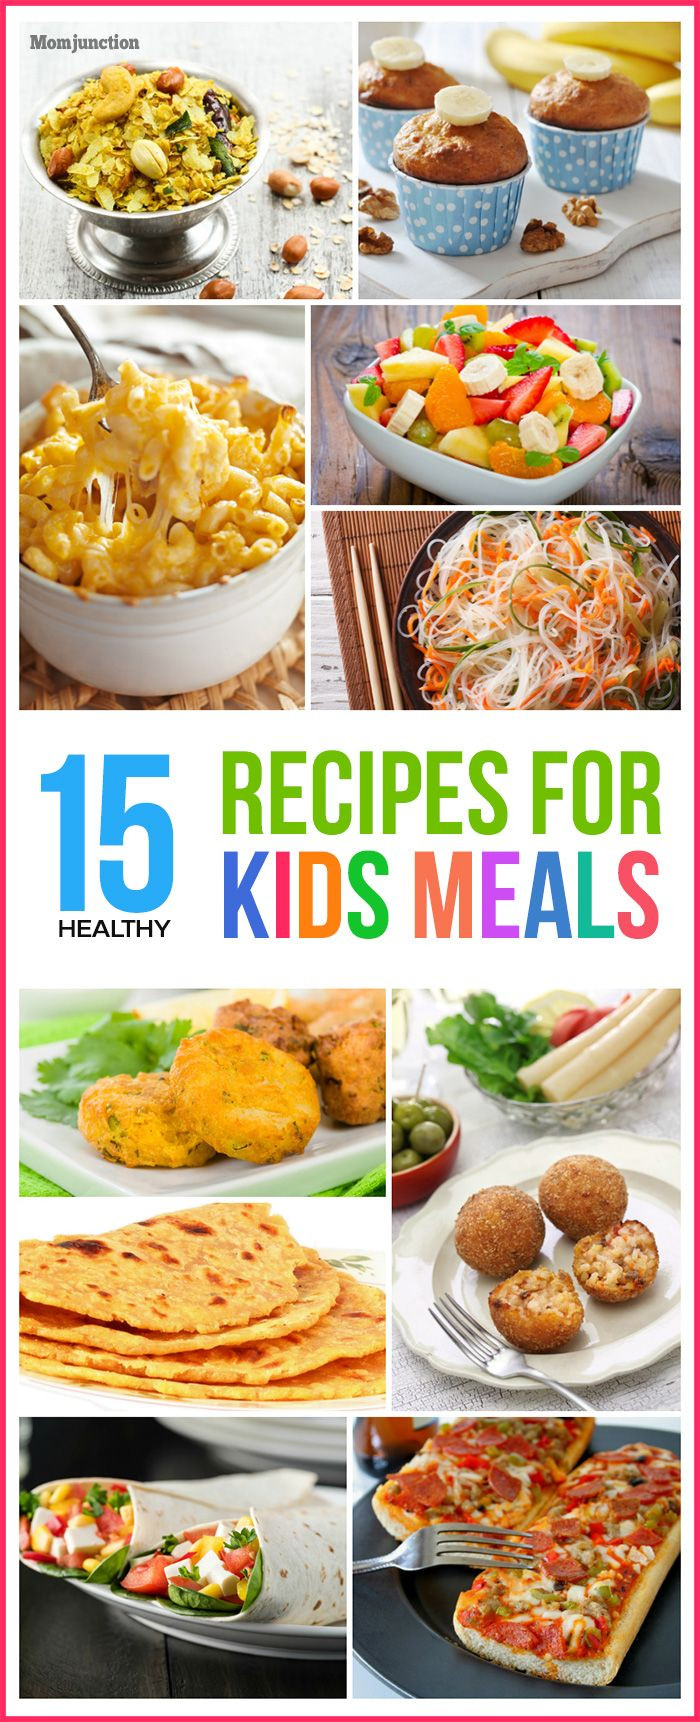 Easy Healthy Dinner Recipes Kid Friendly
 Top 15 Healthy Recipes For Kids Meals